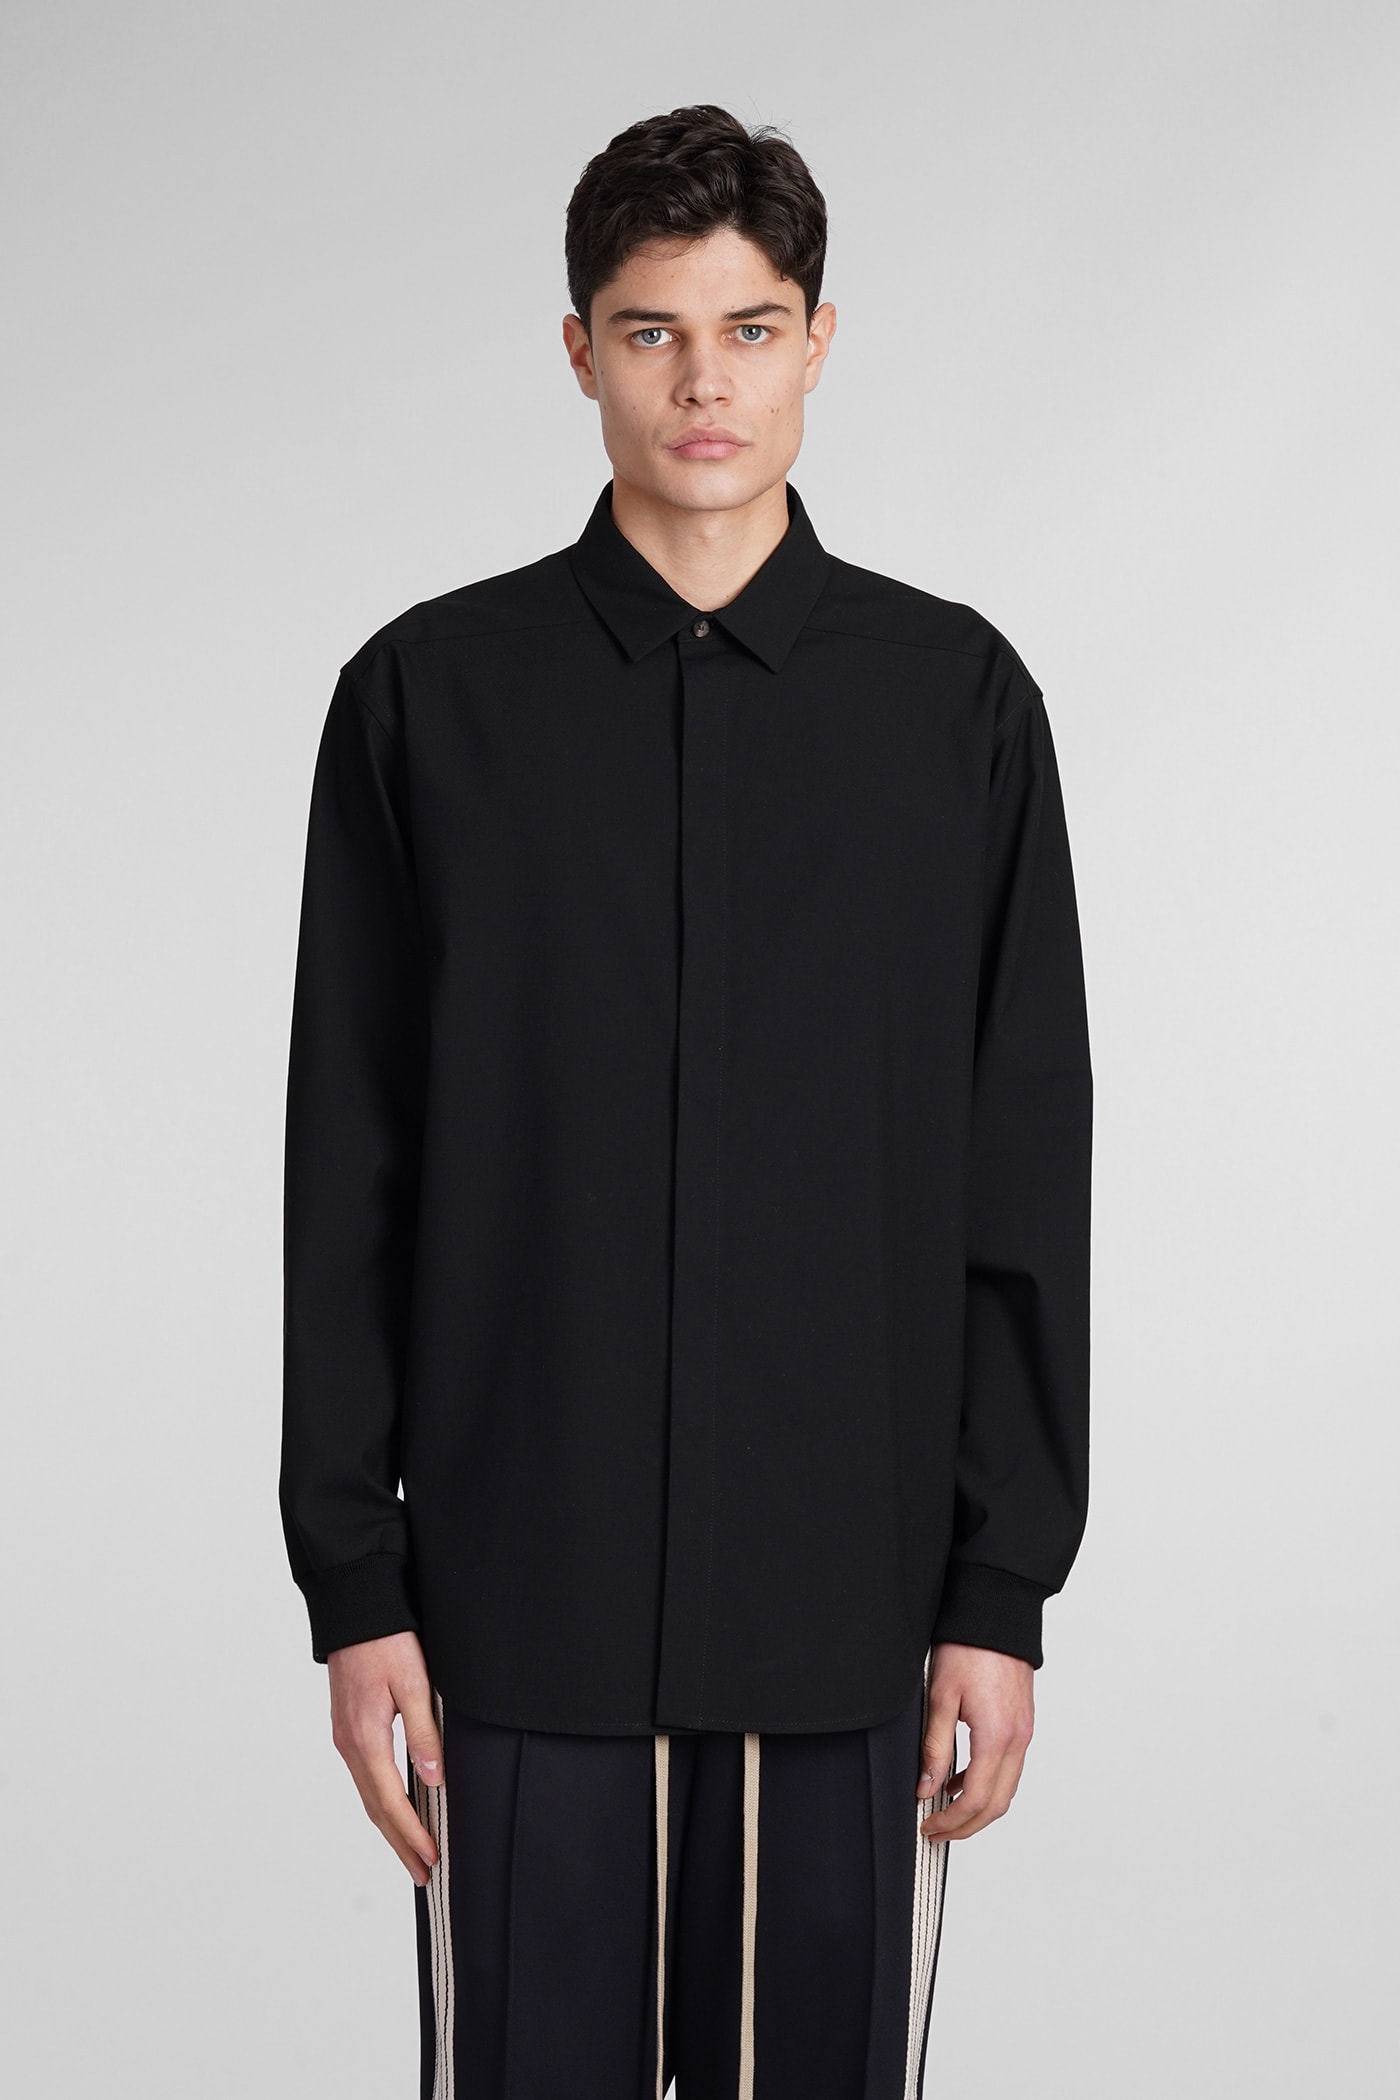 Fear Of God Shirt In Black Cotton